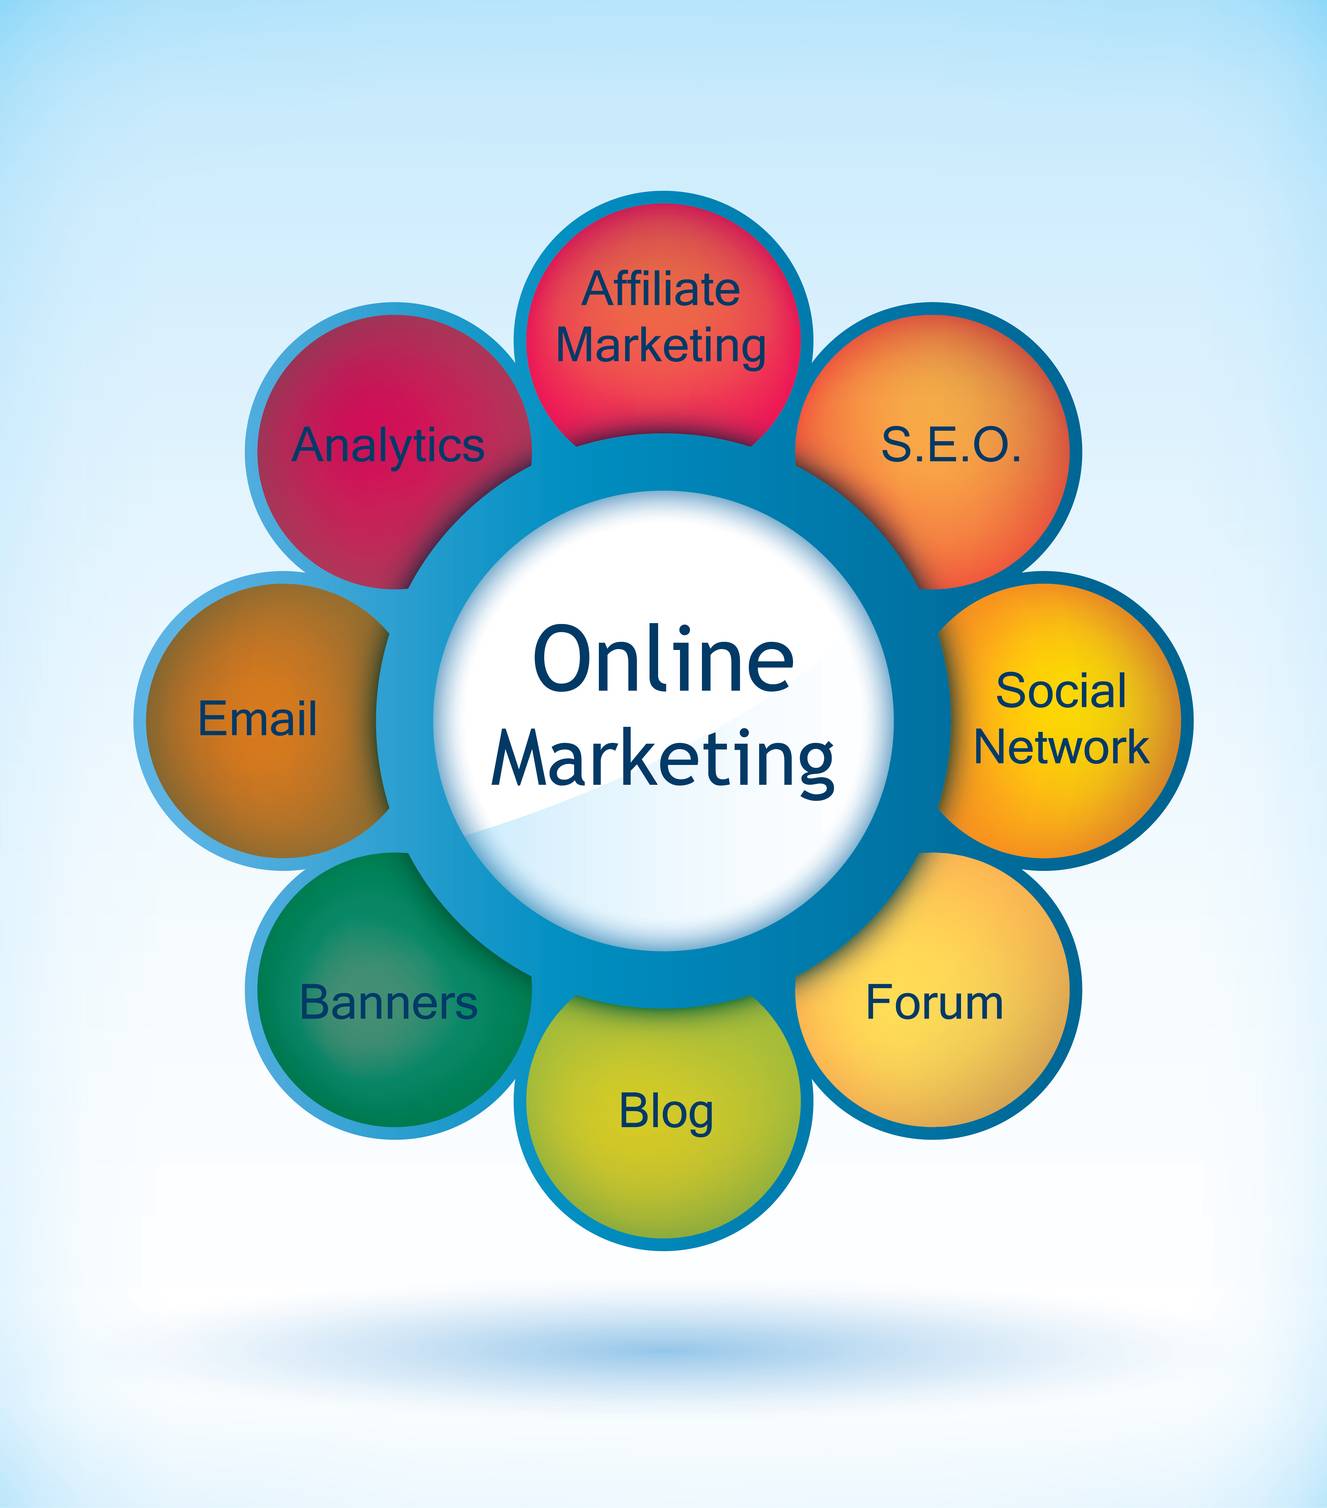 Online Marketing McKinney TX: Help From Experts Makes All The Difference